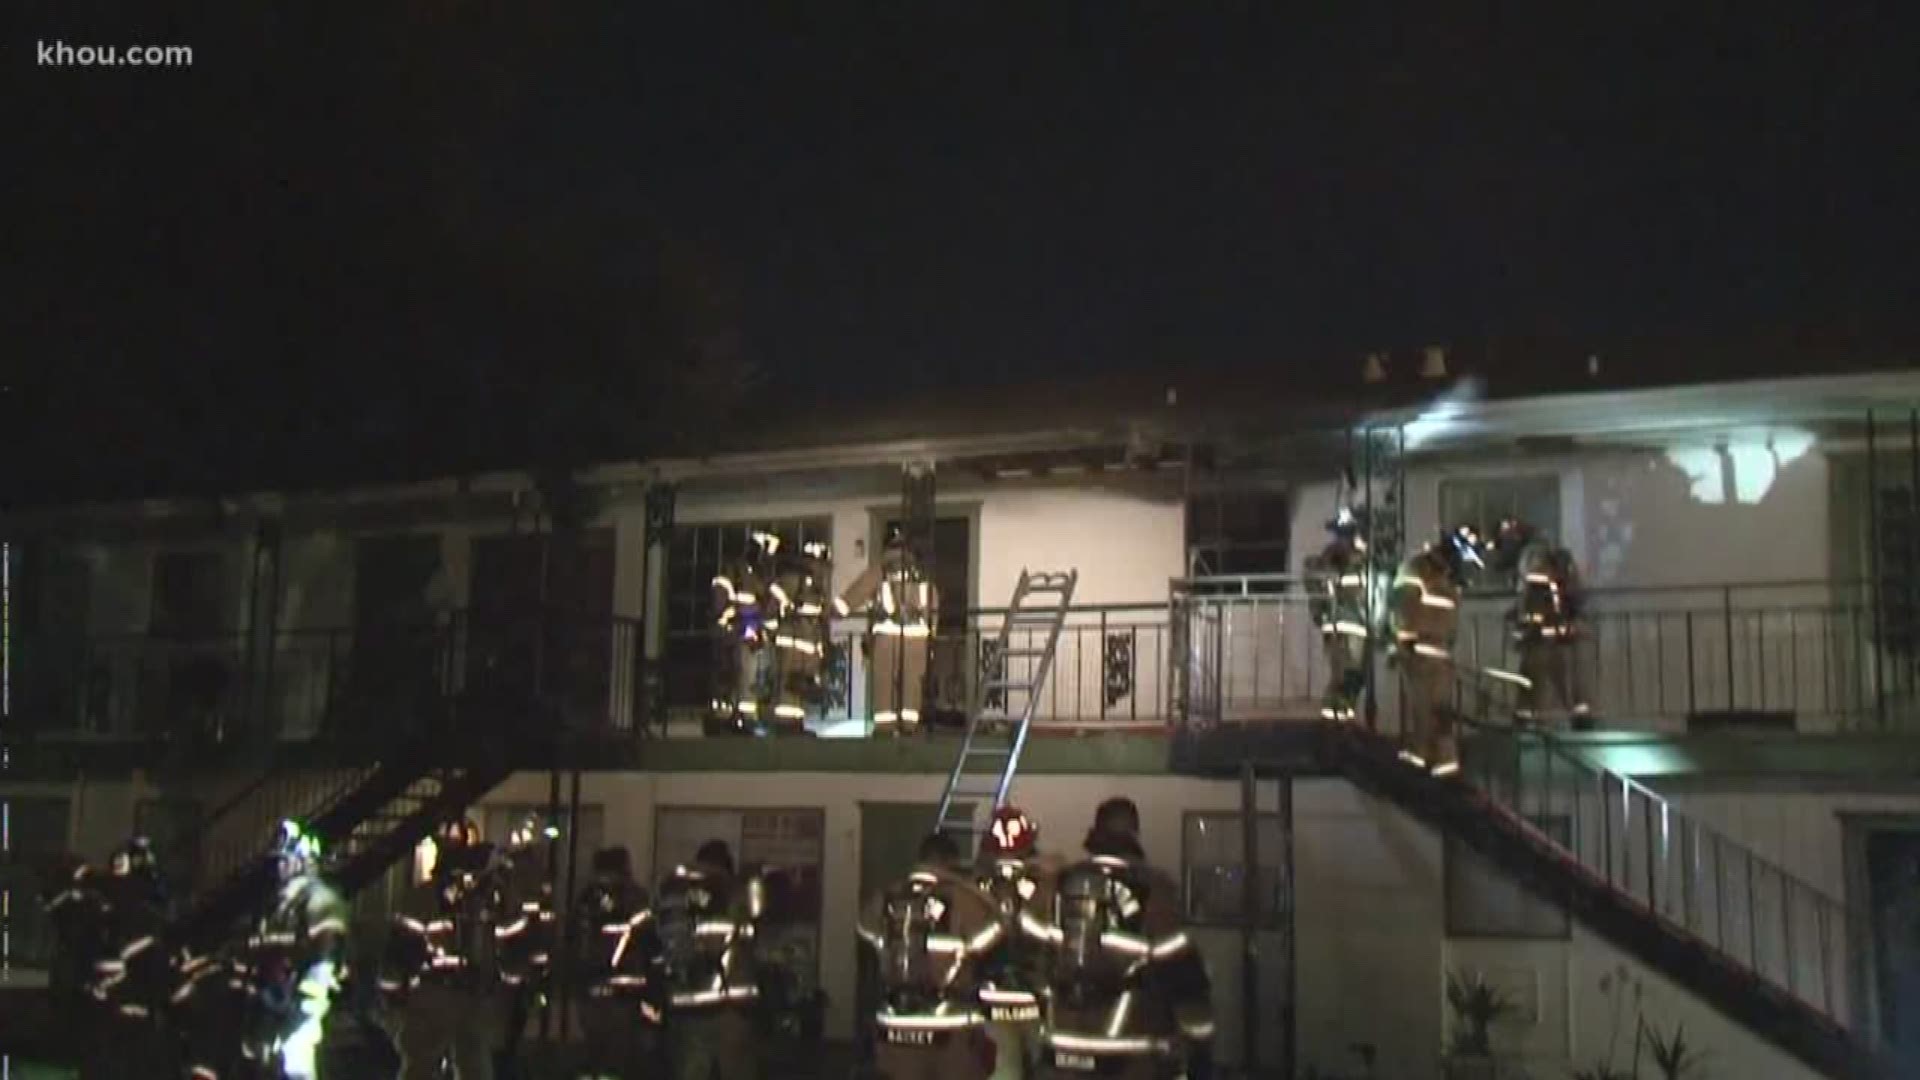 An apartment fire in southwest Houston left one man dead and three families without a home overnight.